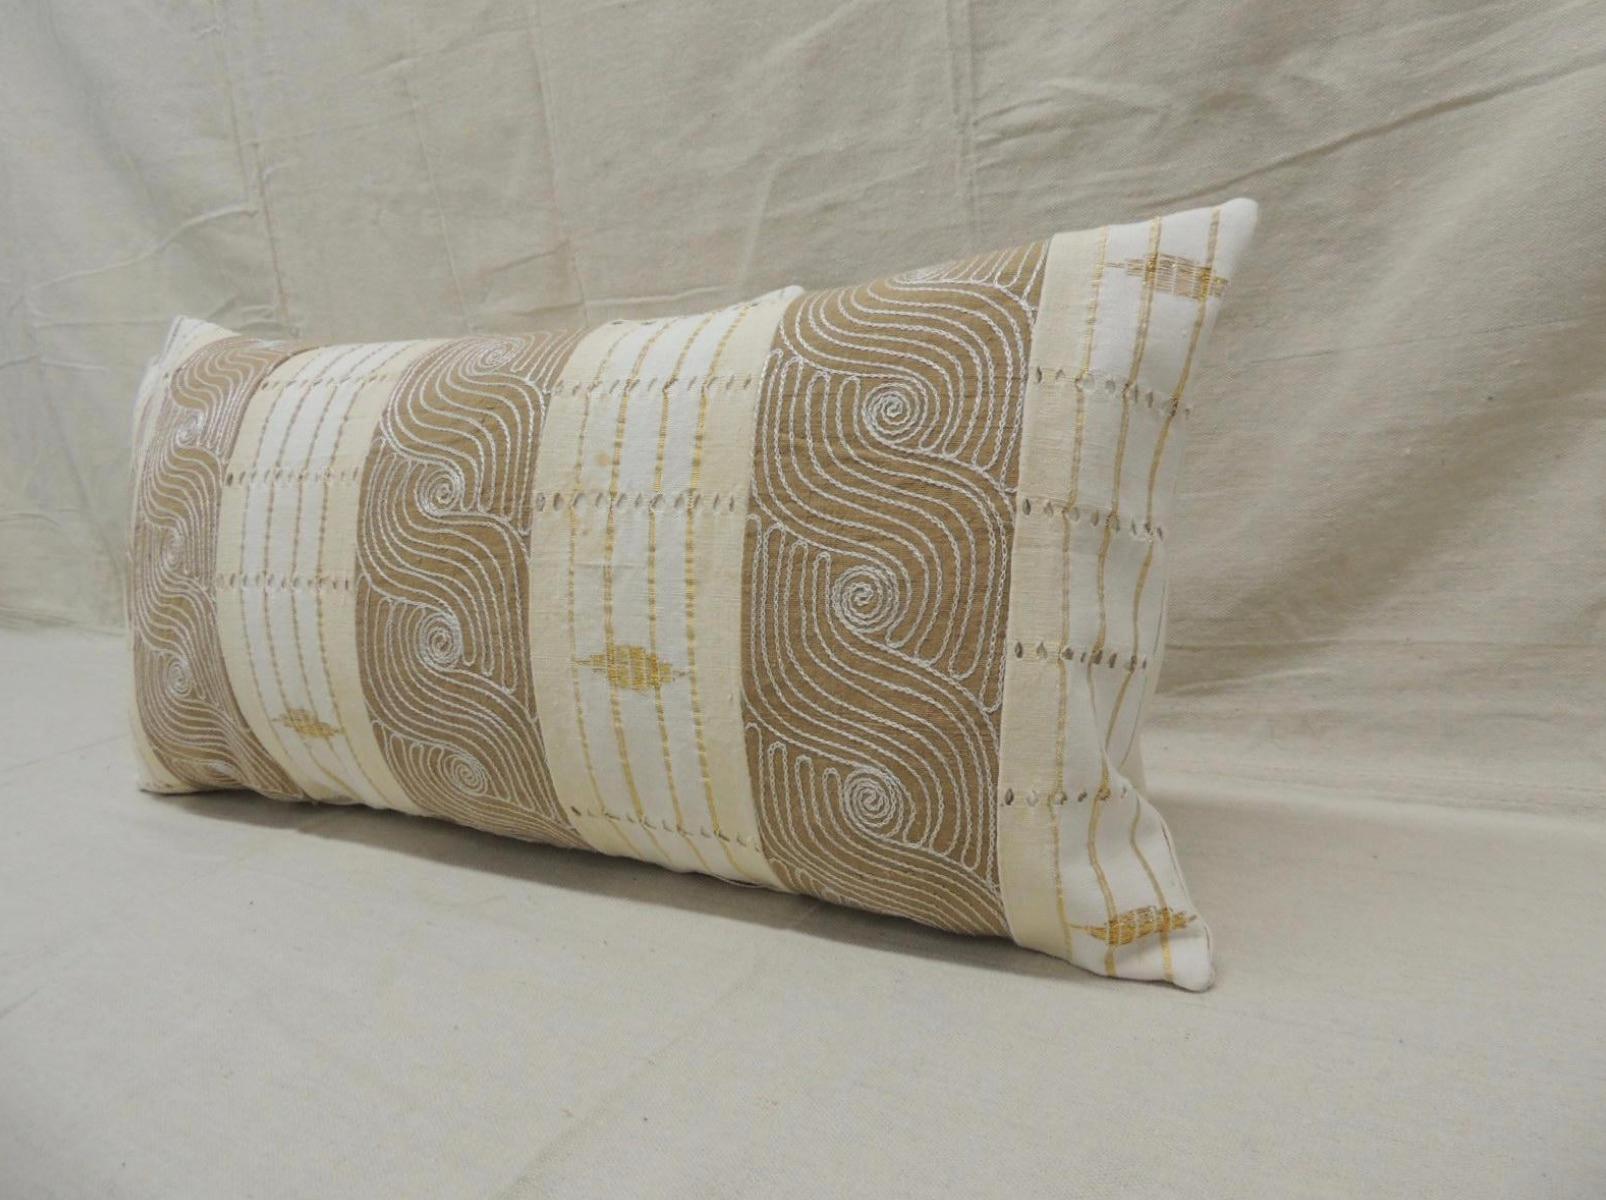 Pair of vintage decorative bolster pillows. The textile is a handwoven tan and brown ewe stripweave with white embroidery from late 20th century Ghana. 
Decorative pillows were handcrafted and designed in the USA.
Closure by stitch (no zipper